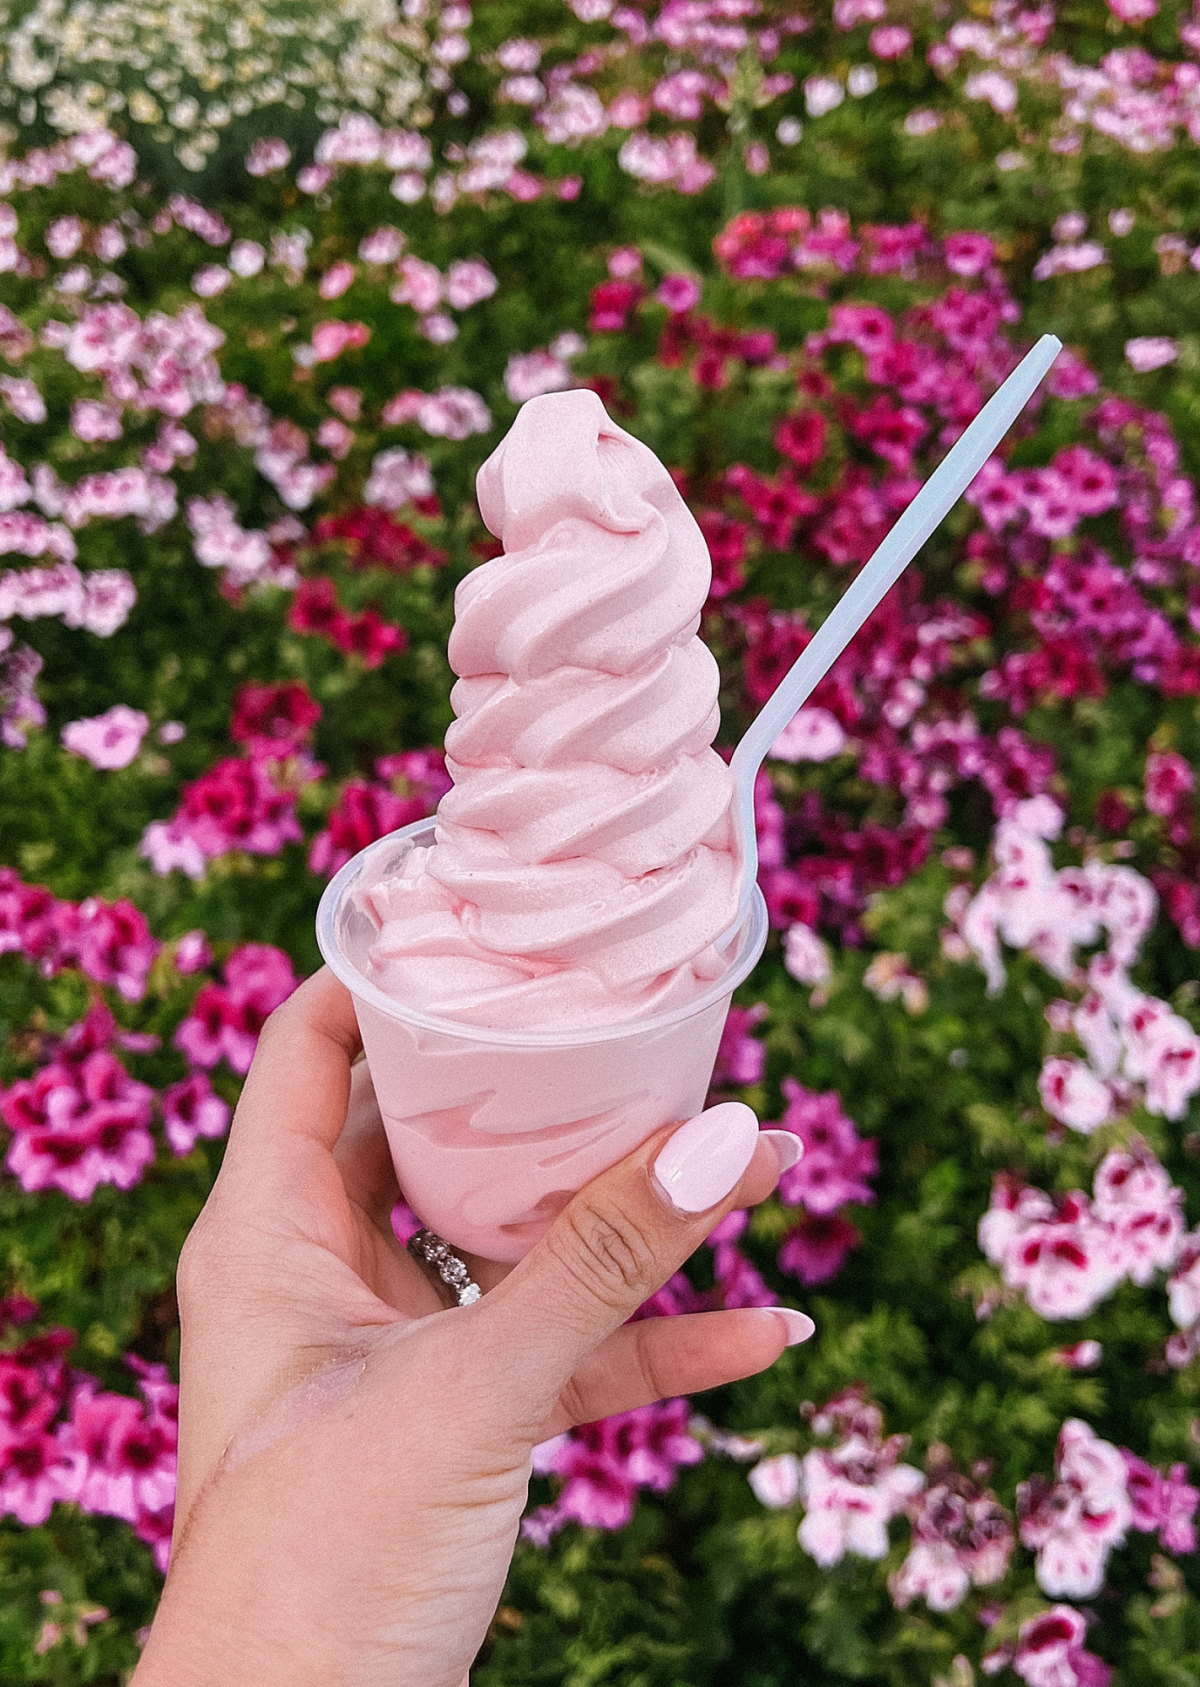 The Flower Fields Carlsbad strawberry Dole whip